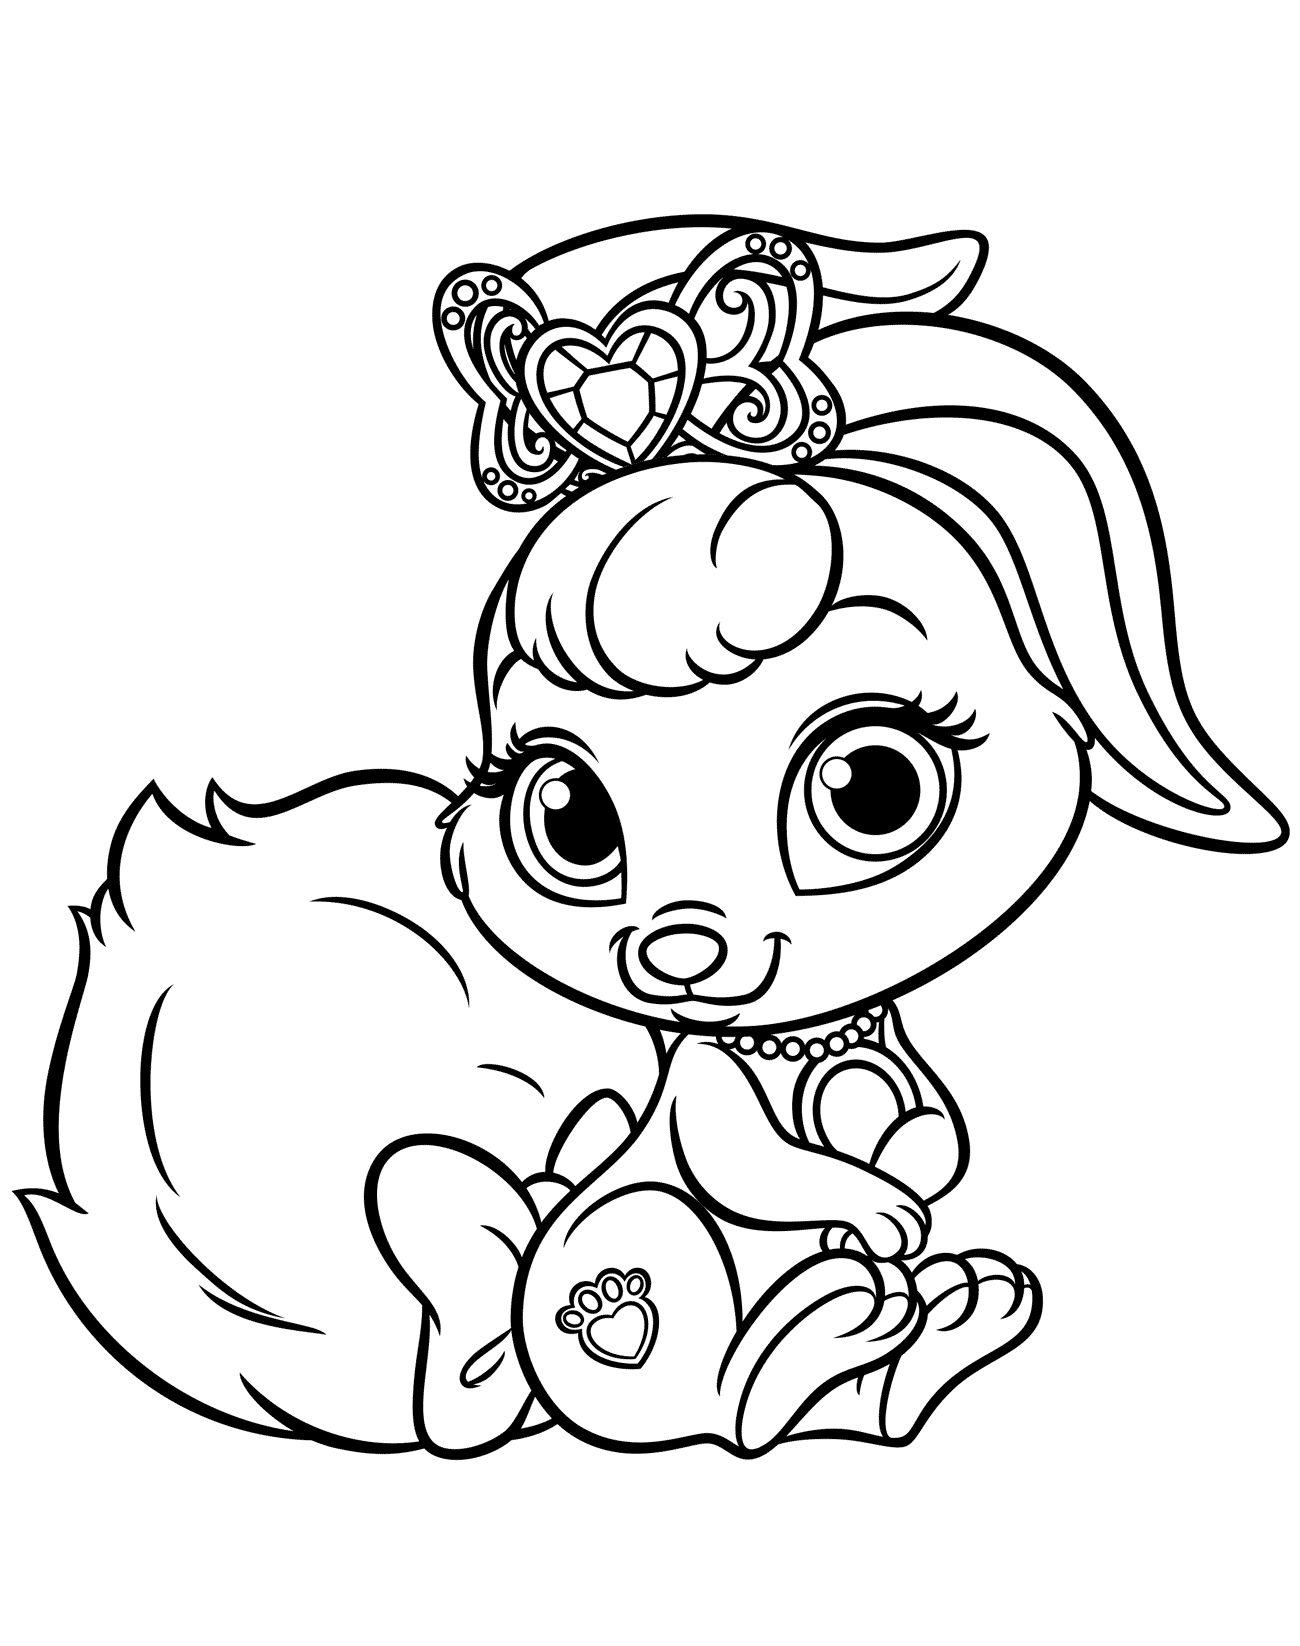 Coloring page - Bunny Berry